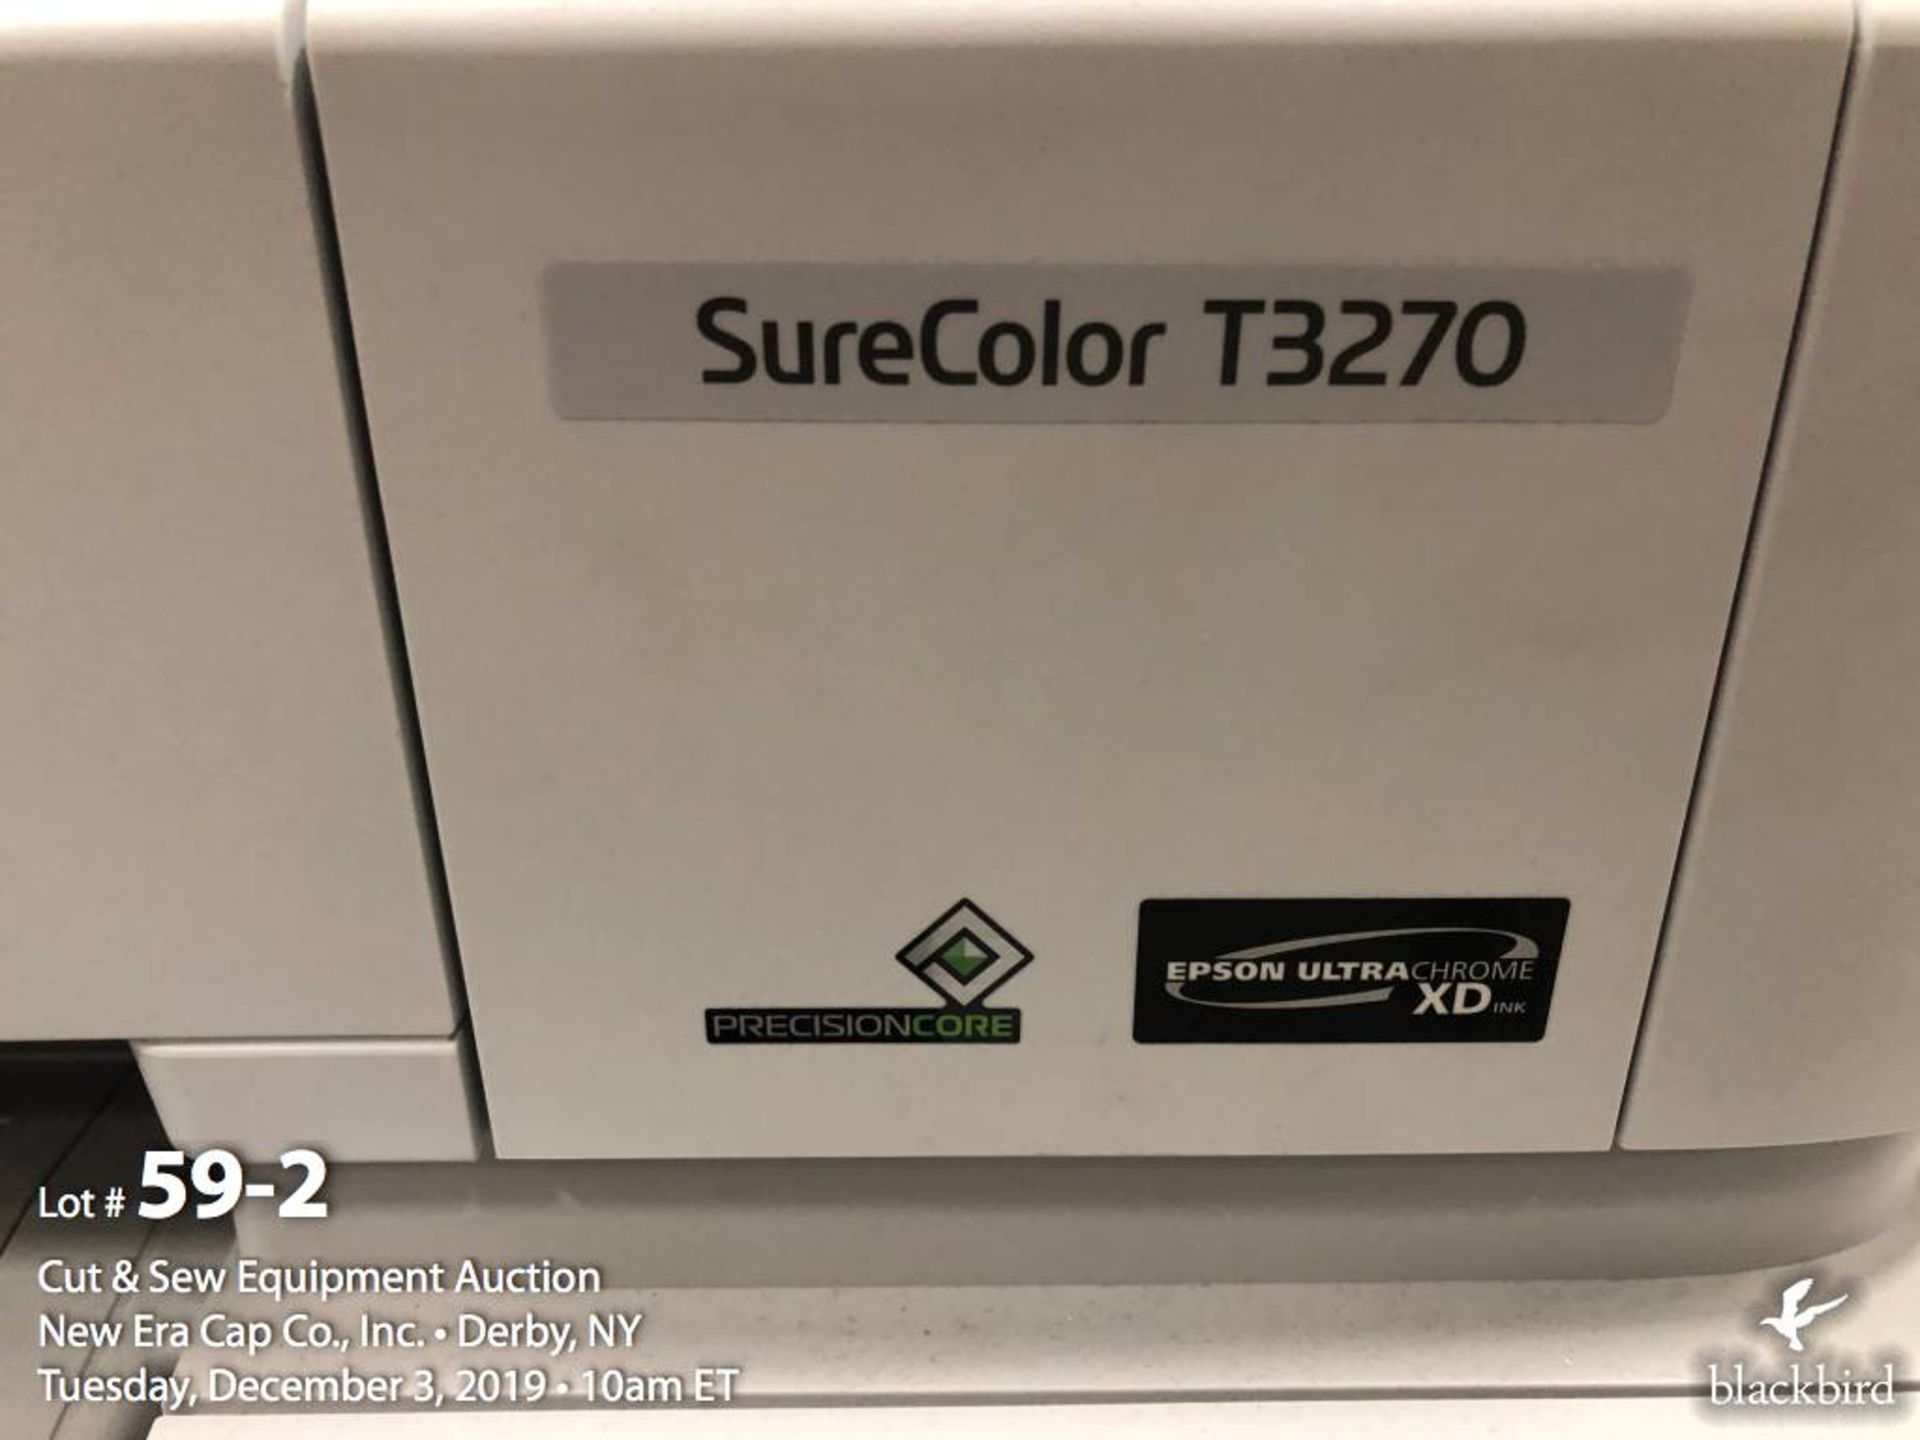 Epson SureColor T3270 24" Single Roll Edition Printer - Image 2 of 5